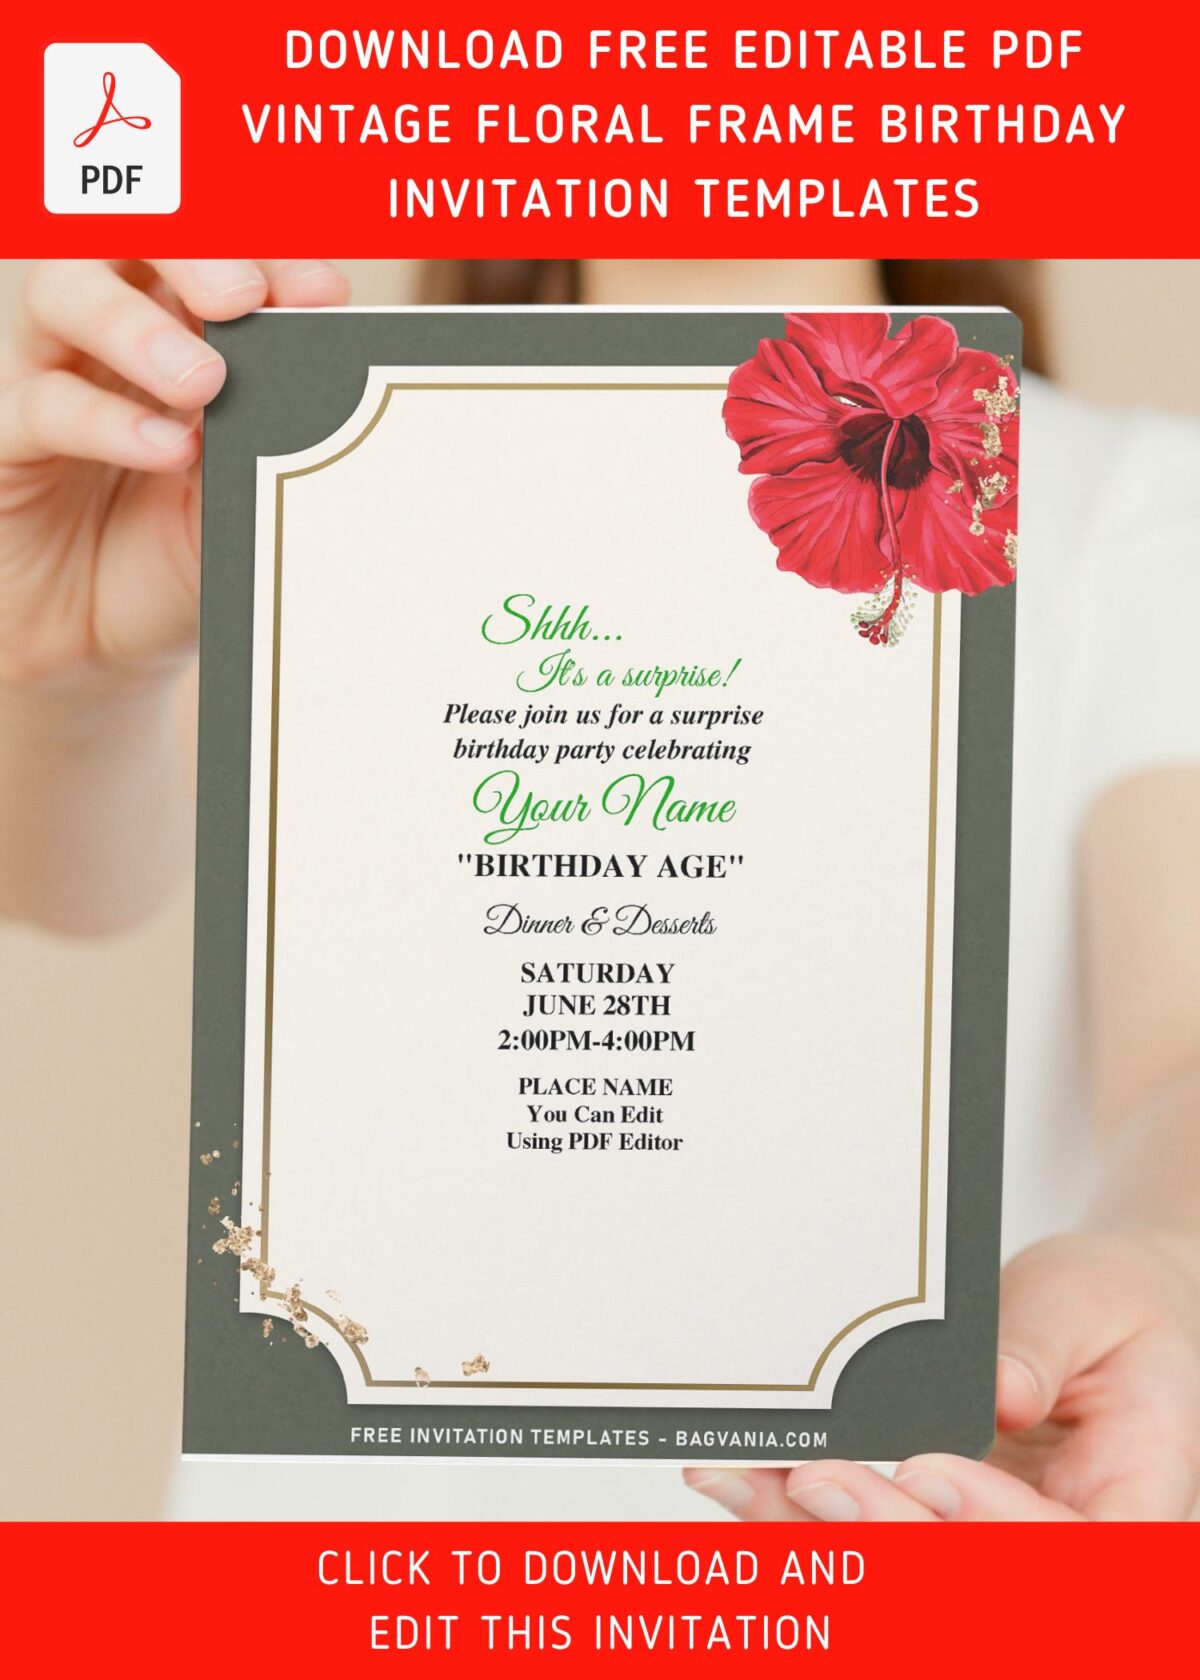 (Free Editable PDF) Lovely Floral Frame Birthday Invitation Templates with editable text